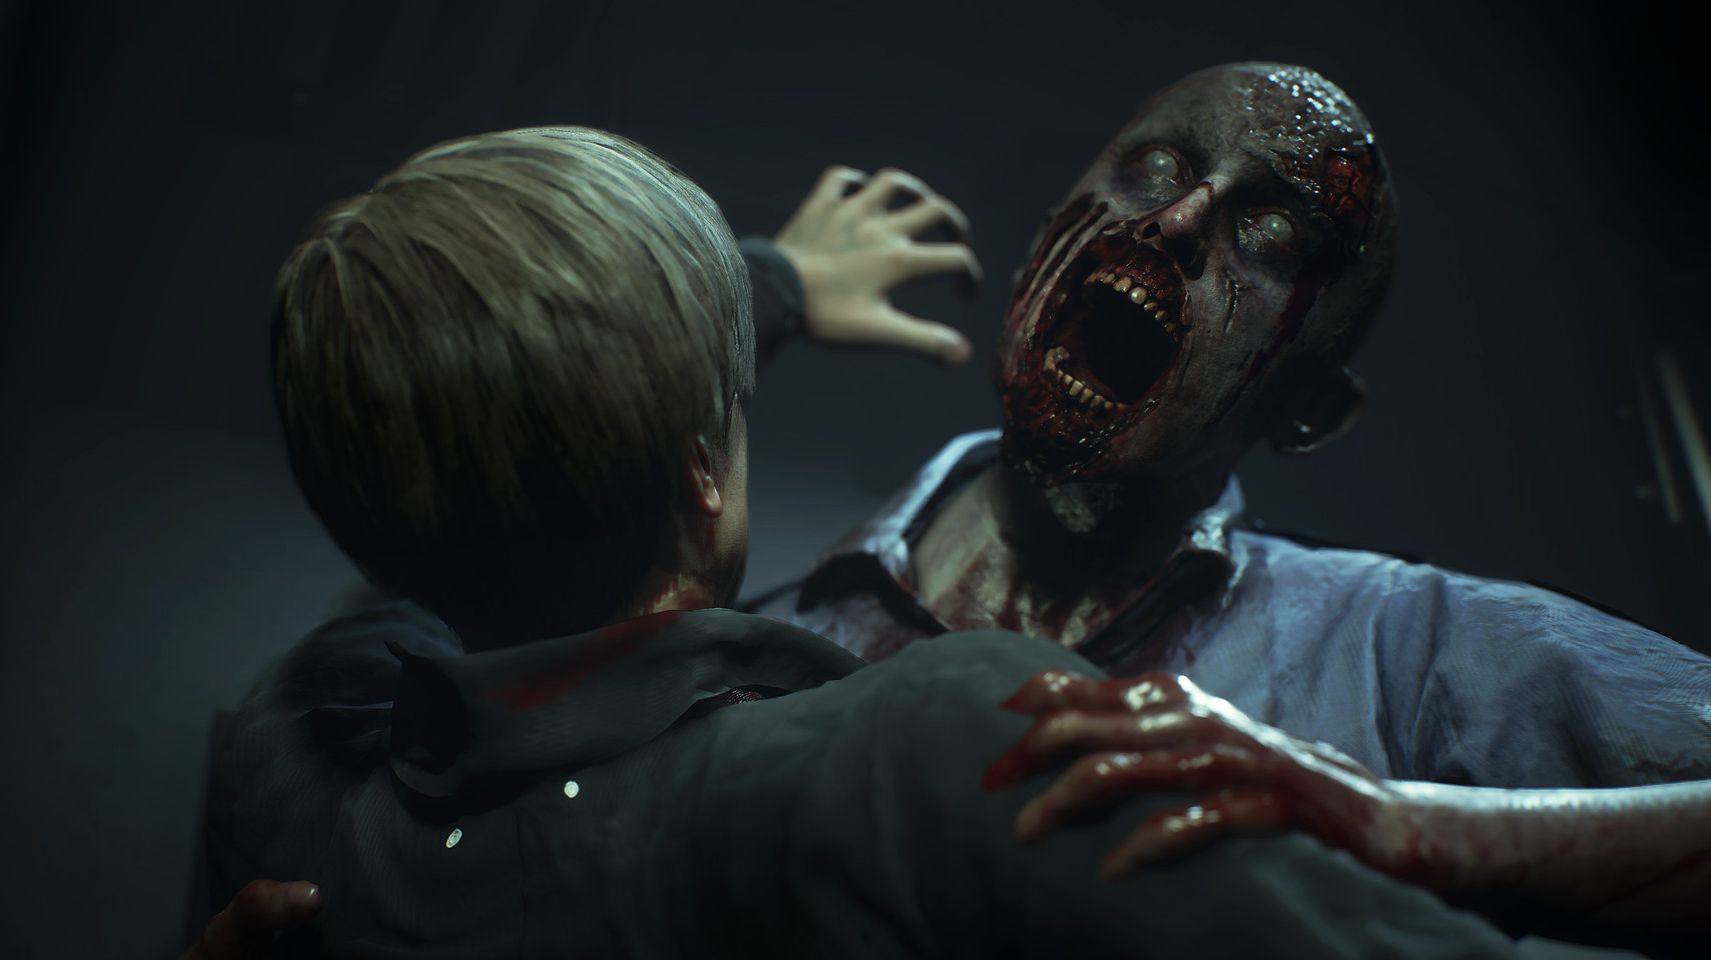 A zombie in Resident Evil 2 the remake, on the attack and about to bite Leon S Kennedy